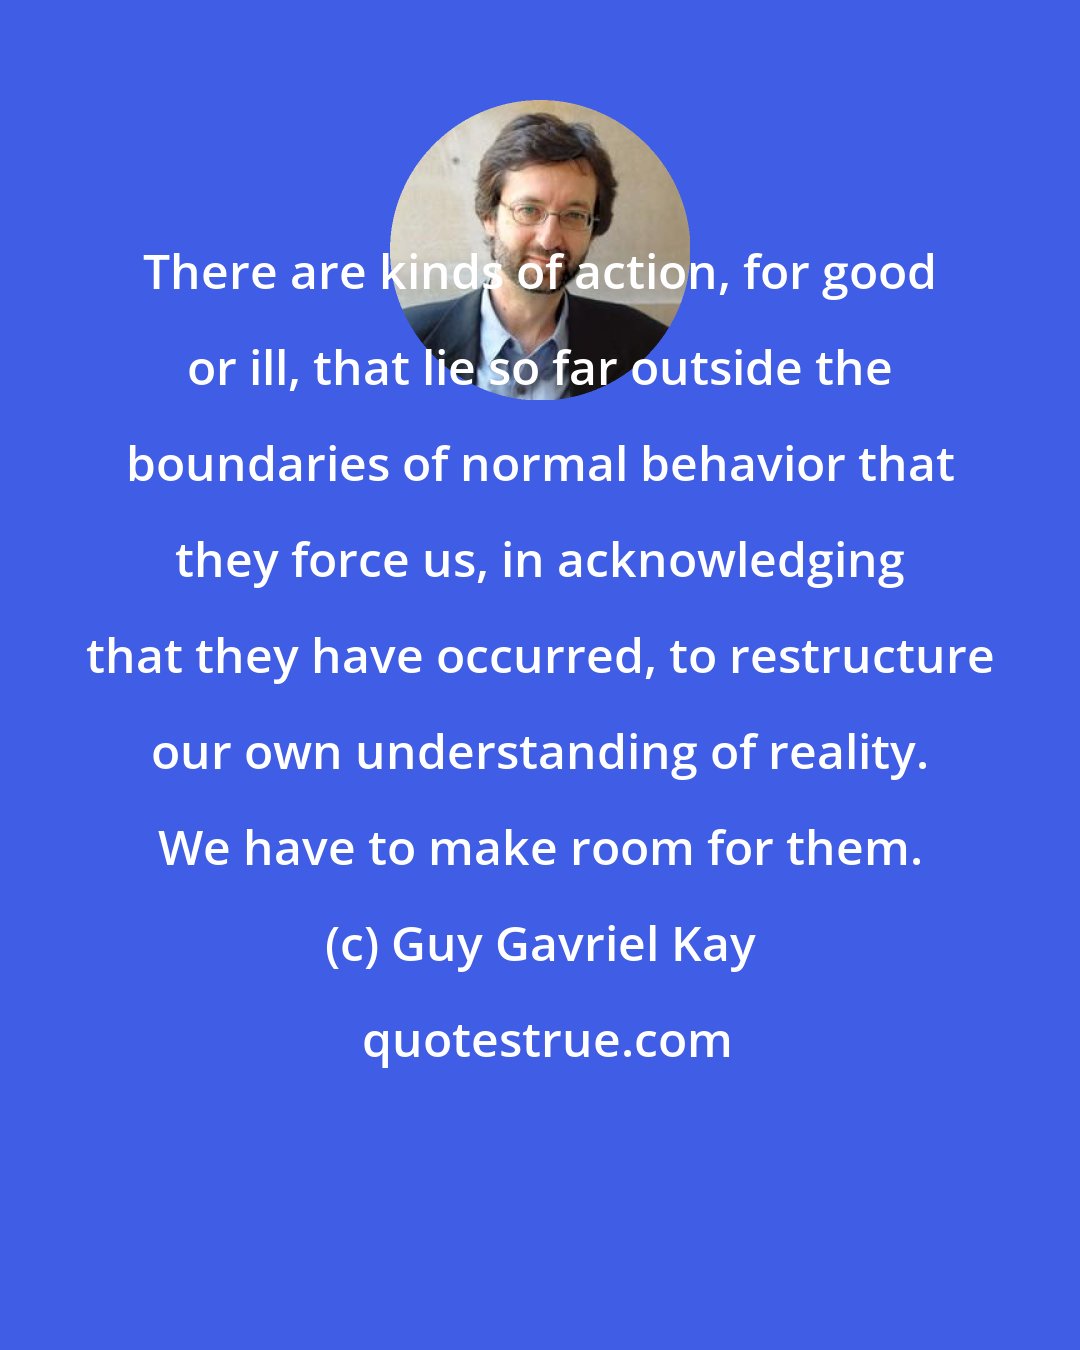 Guy Gavriel Kay: There are kinds of action, for good or ill, that lie so far outside the boundaries of normal behavior that they force us, in acknowledging that they have occurred, to restructure our own understanding of reality. We have to make room for them.